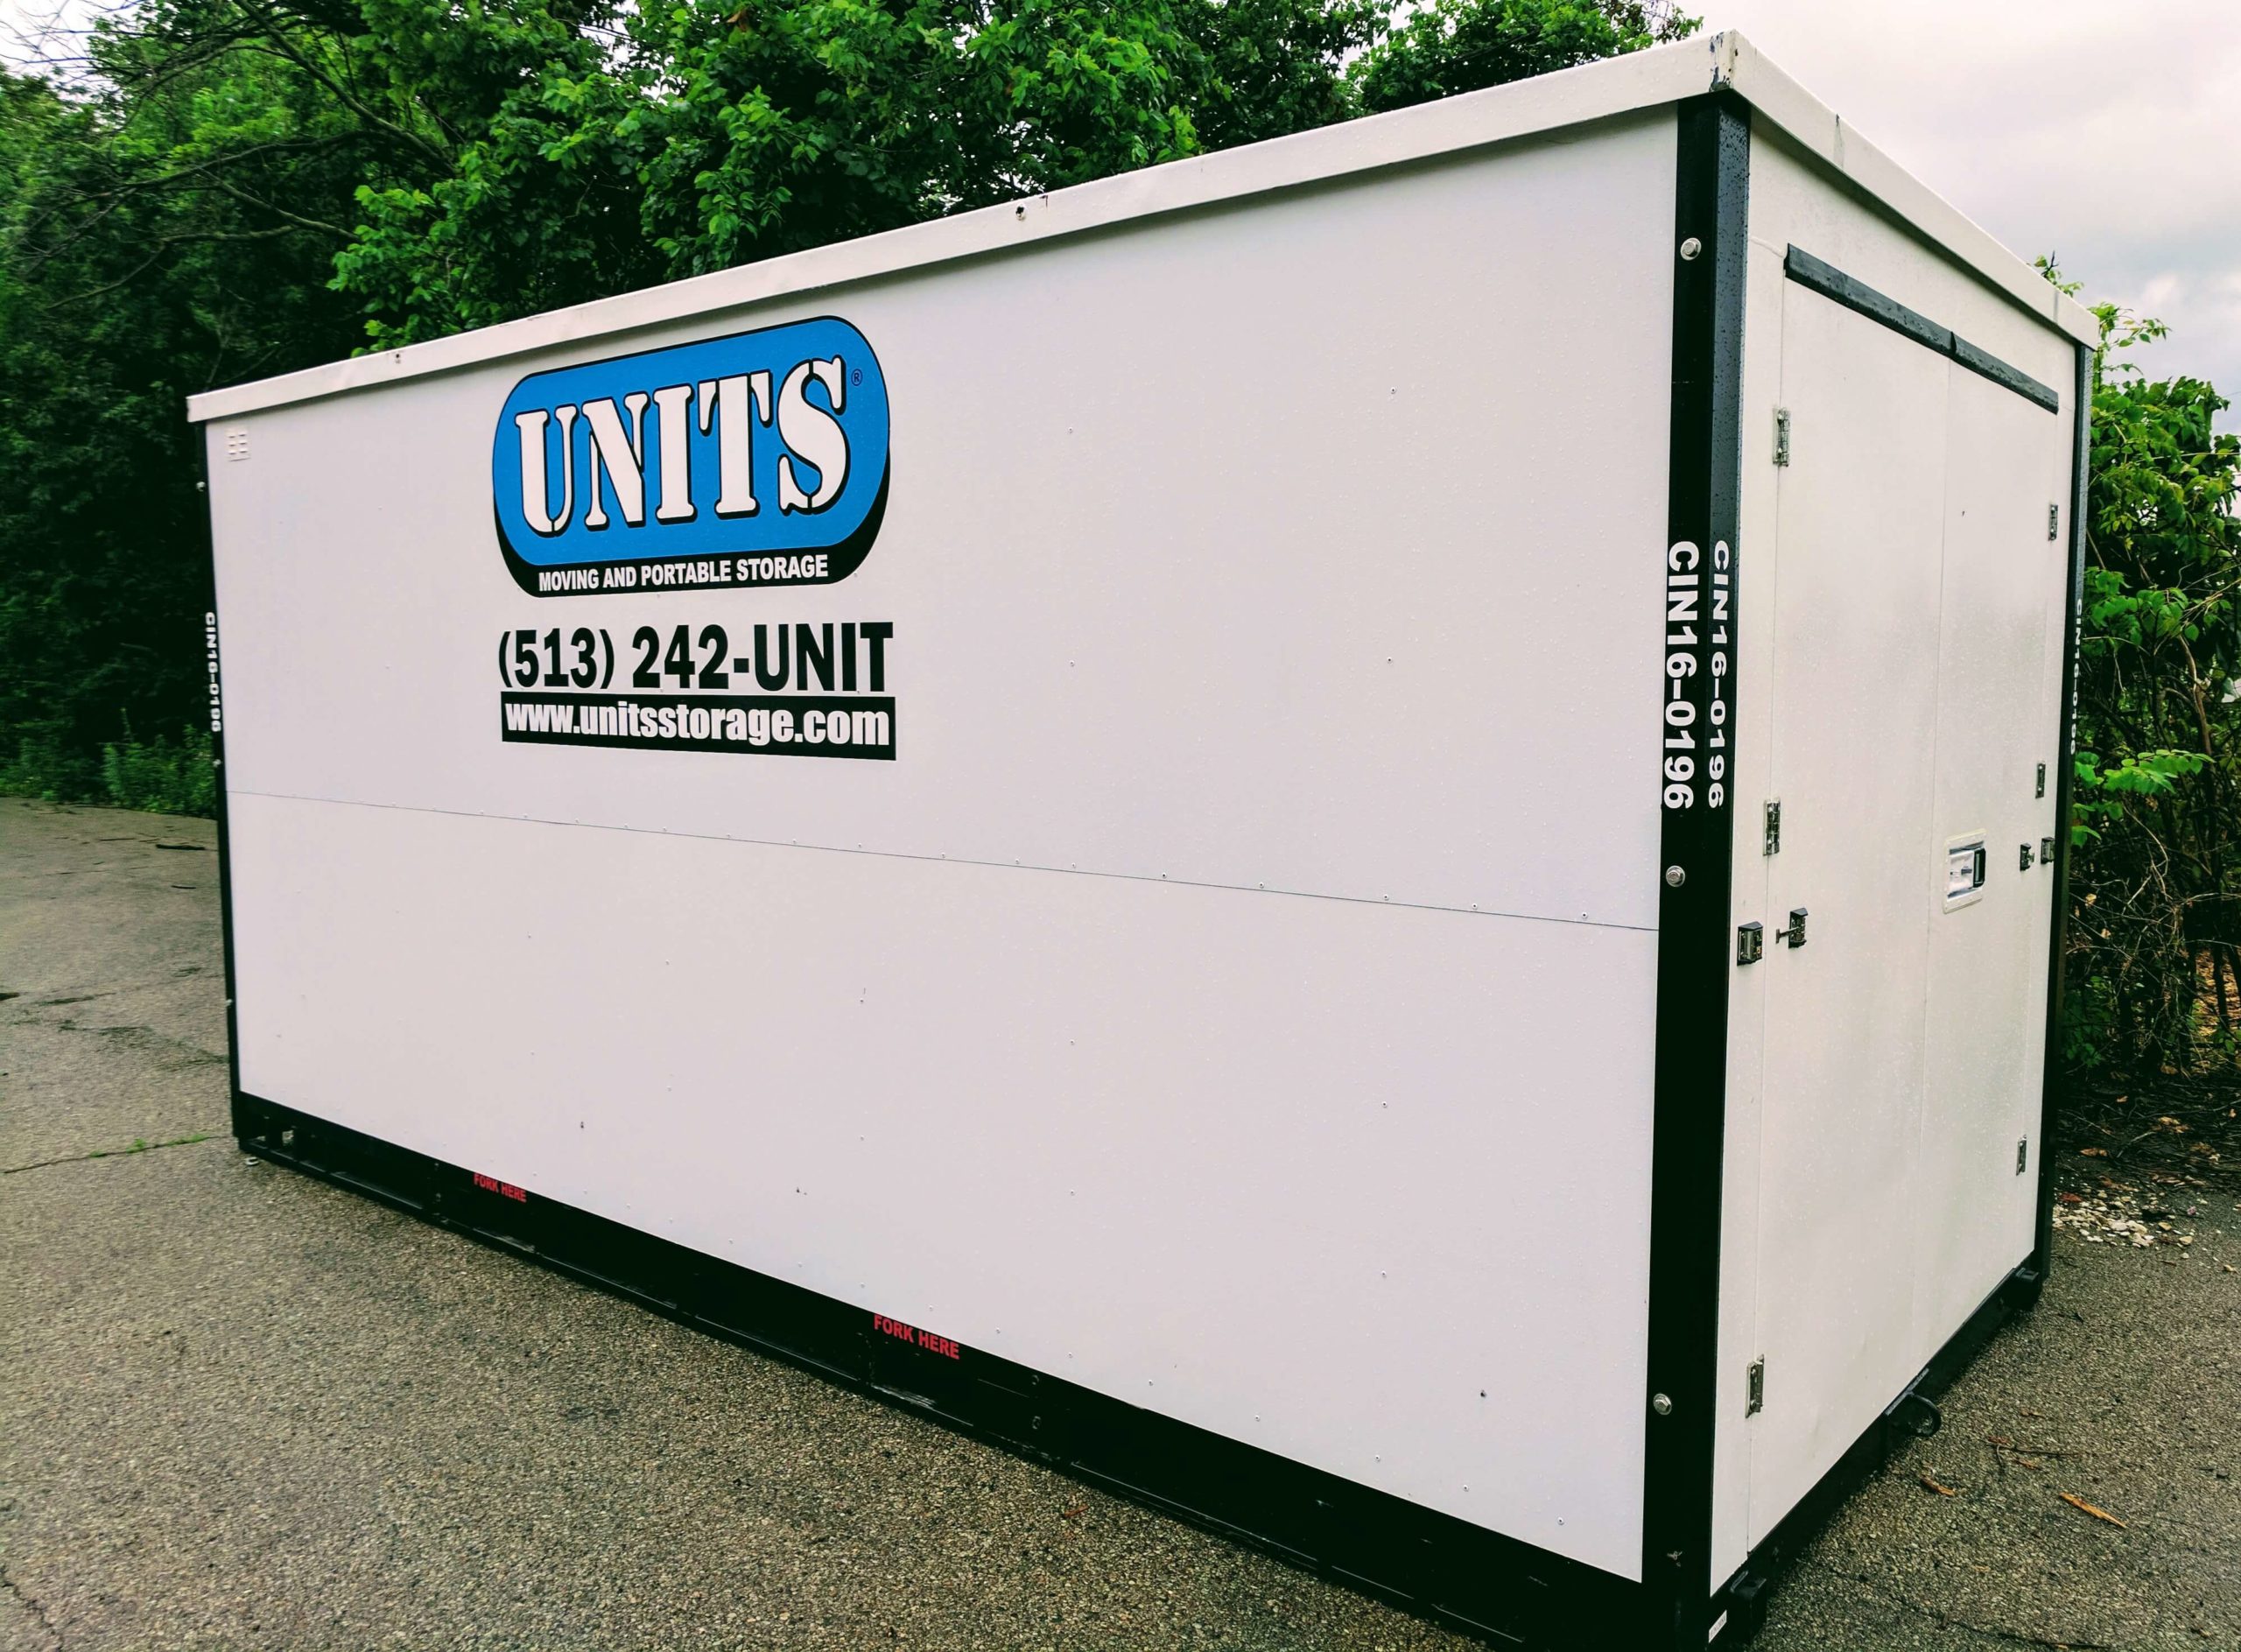 UNITS Moving and Portable Storage of Cincinnati container.